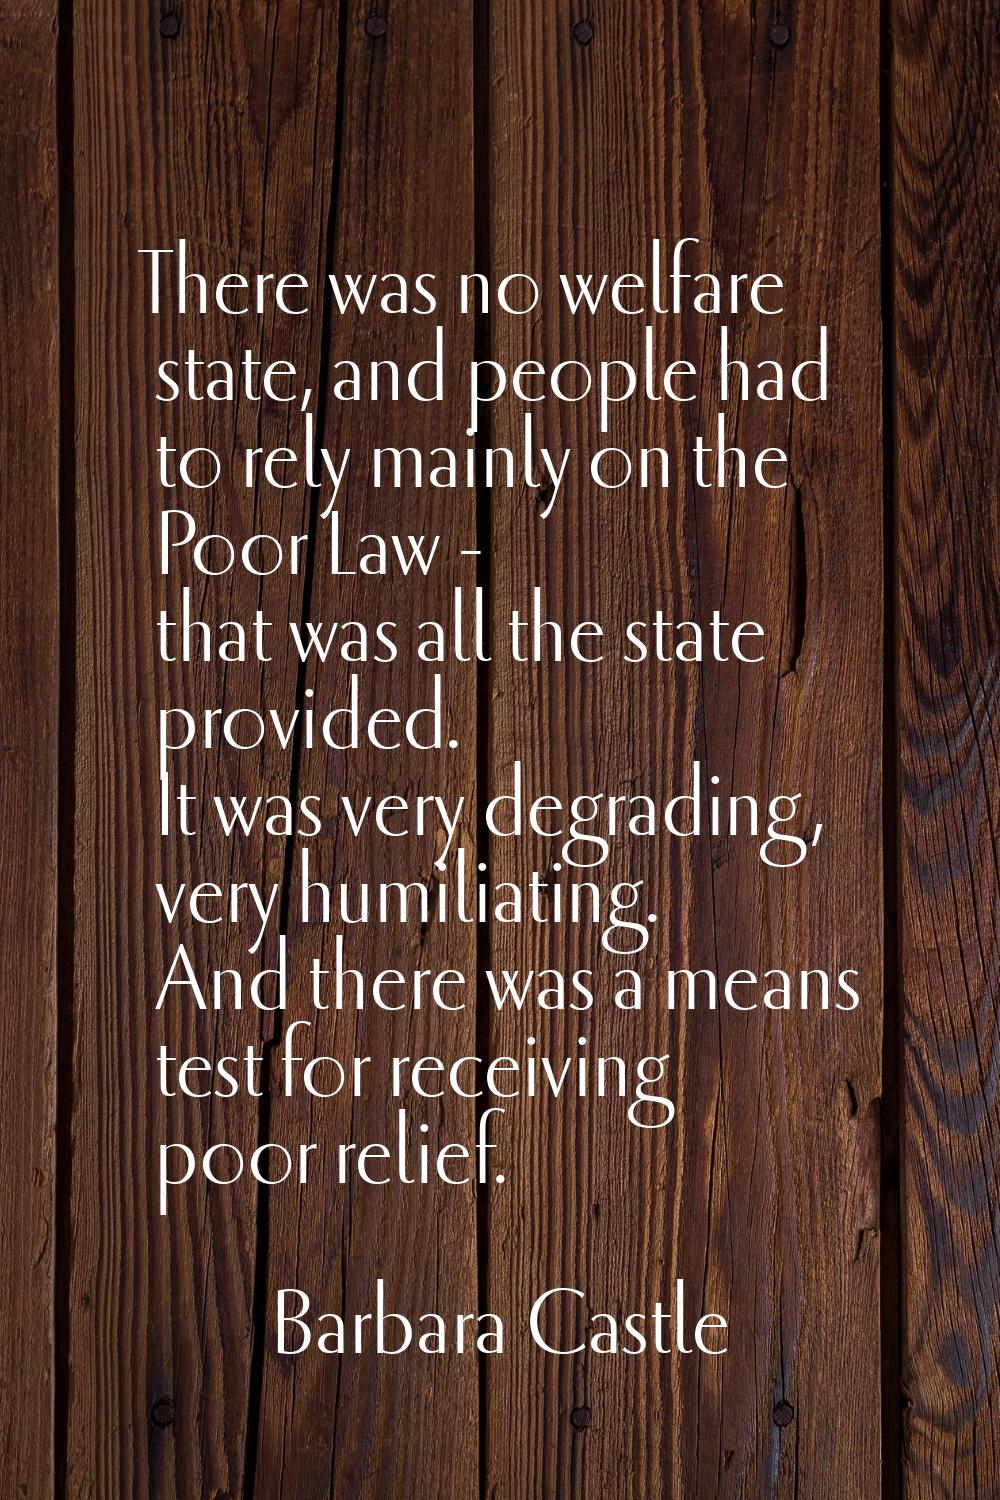 There was no welfare state, and people had to rely mainly on the Poor Law - that was all the state 